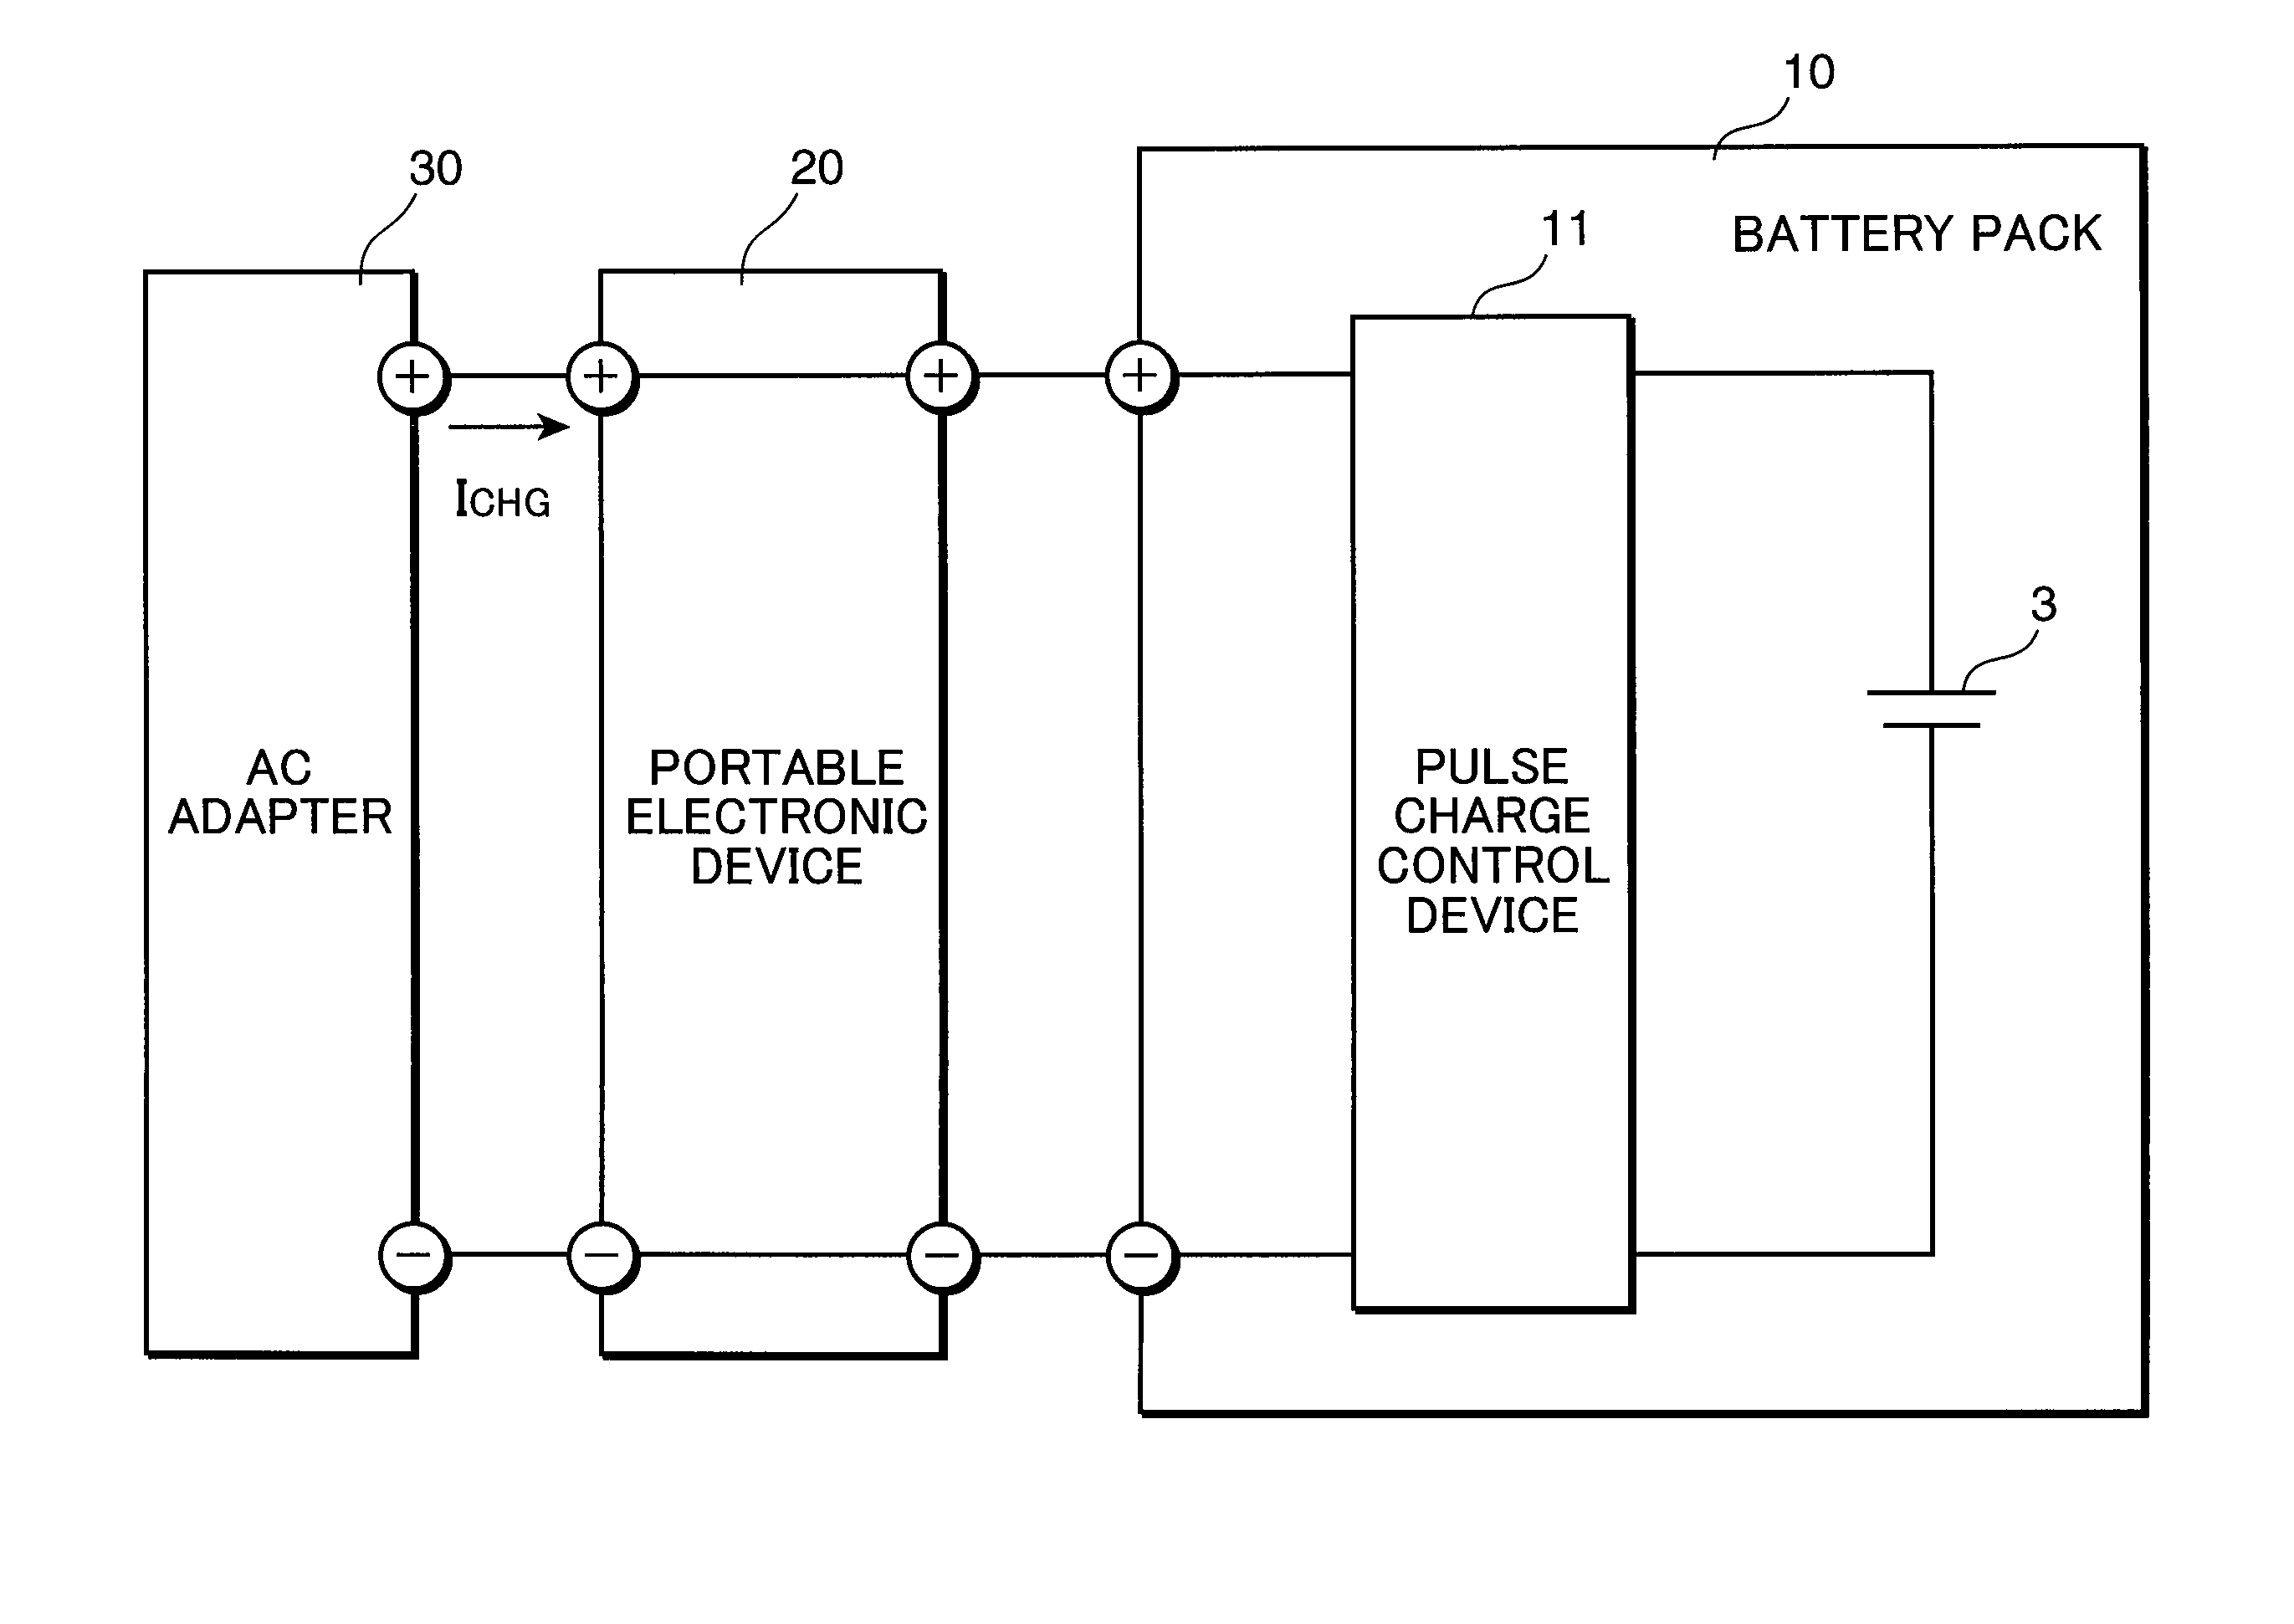 Pulse charge method for nonaqueous electrolyte secondary battery and pulse charge control device